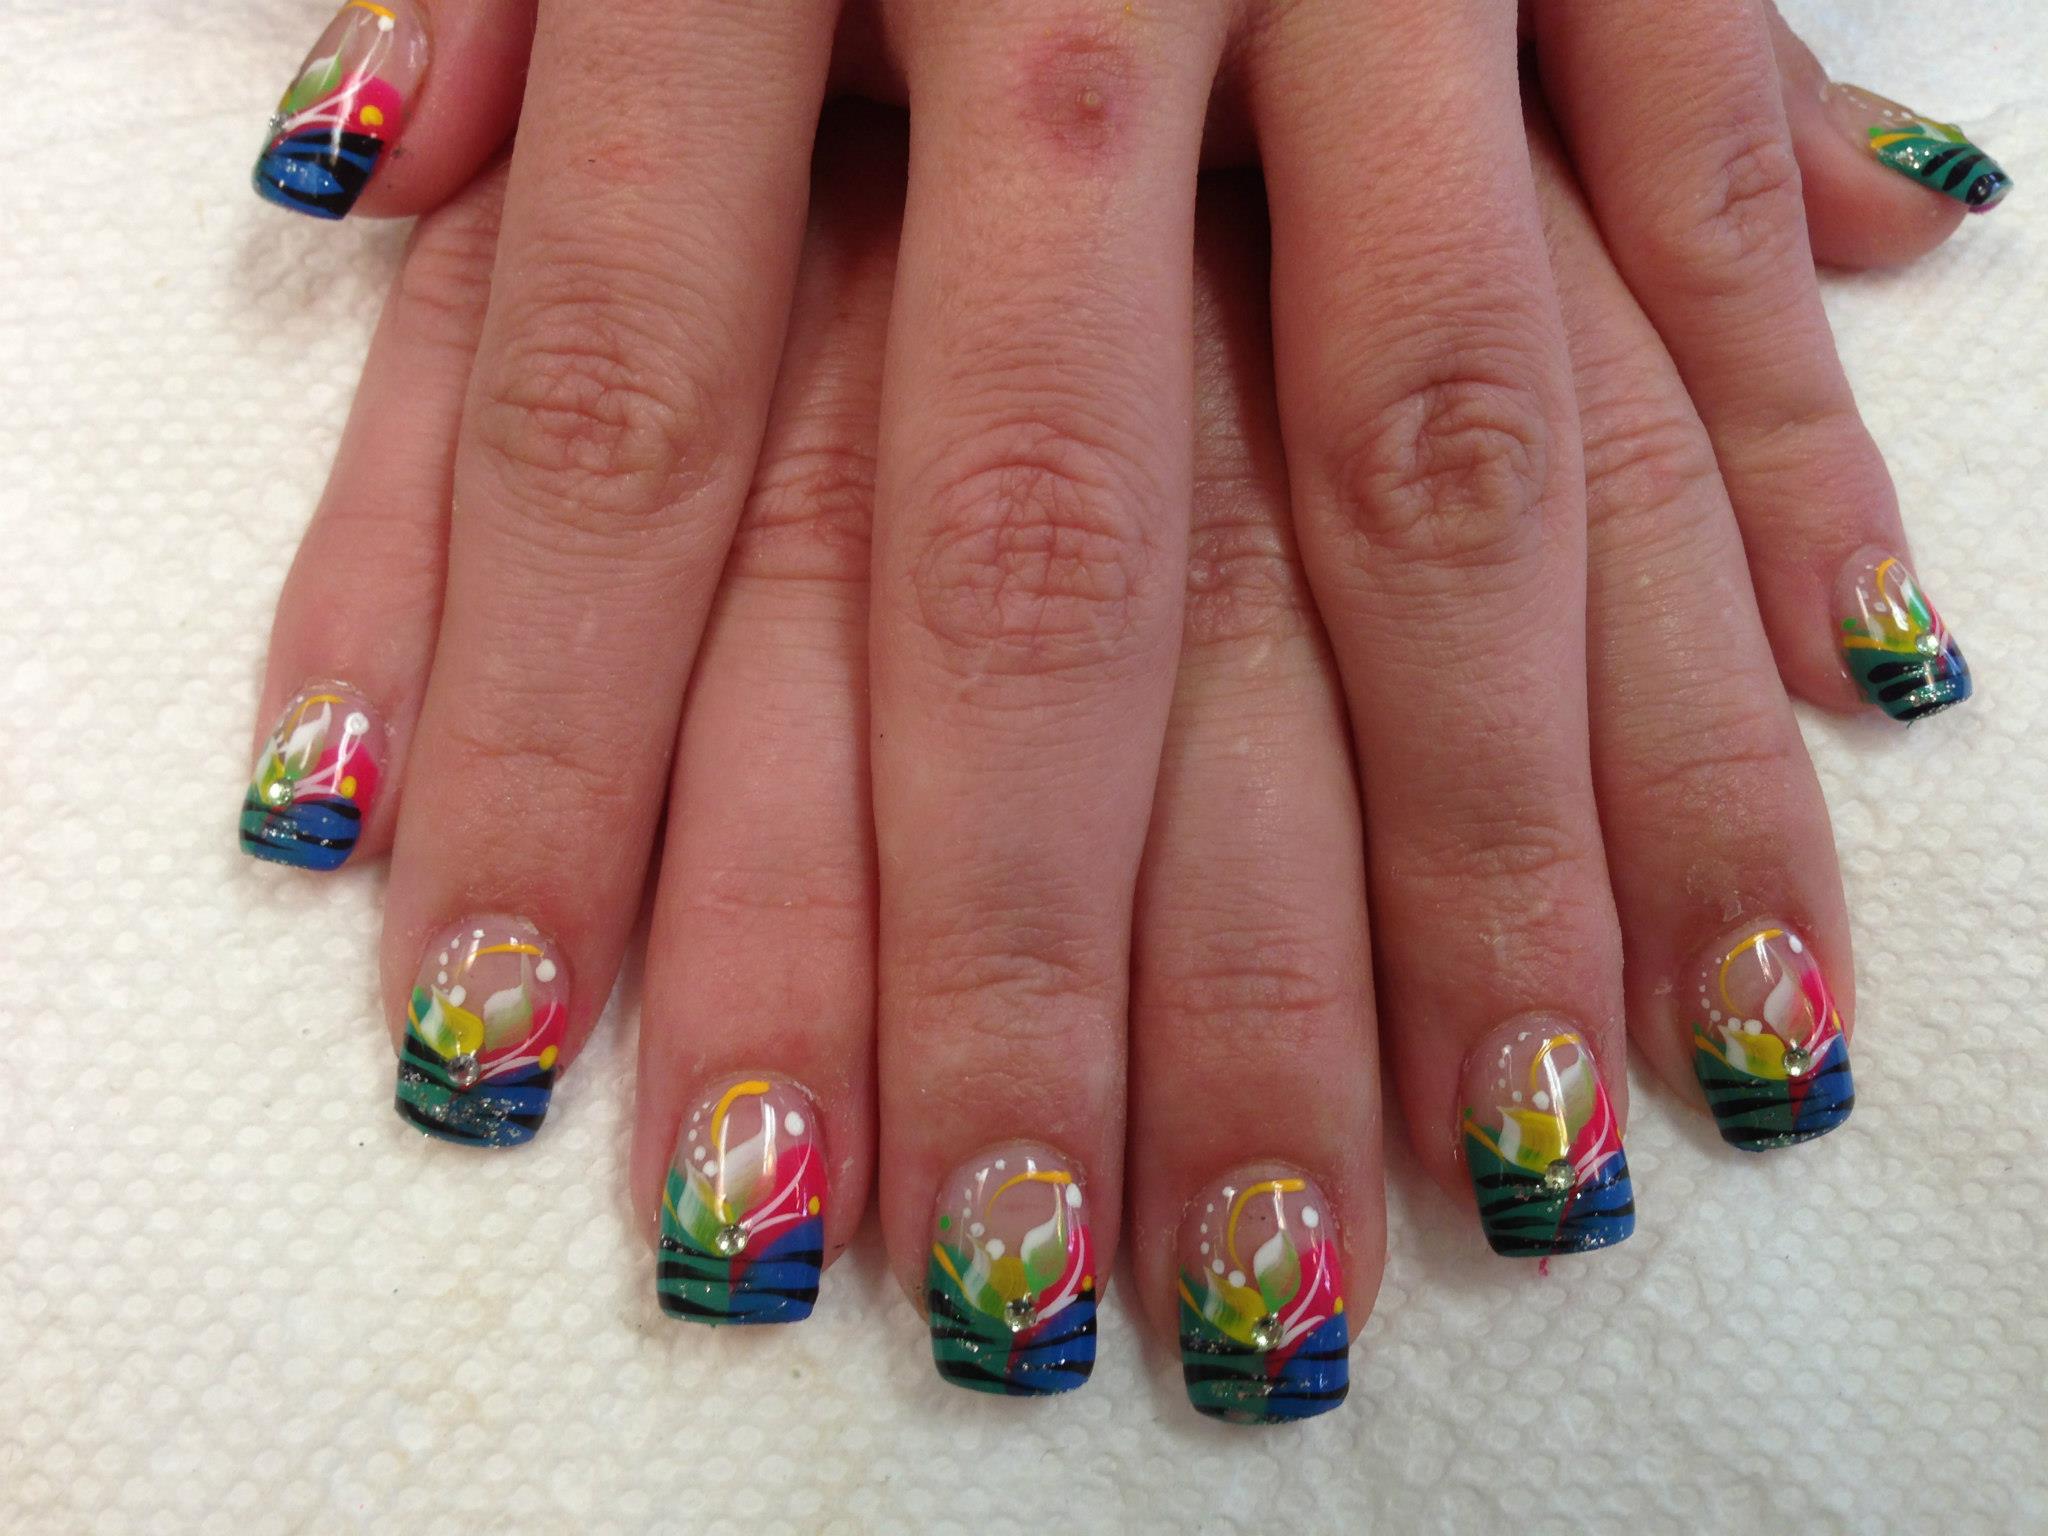 5. "fun nail designs for 10th birthday party" - wide 4